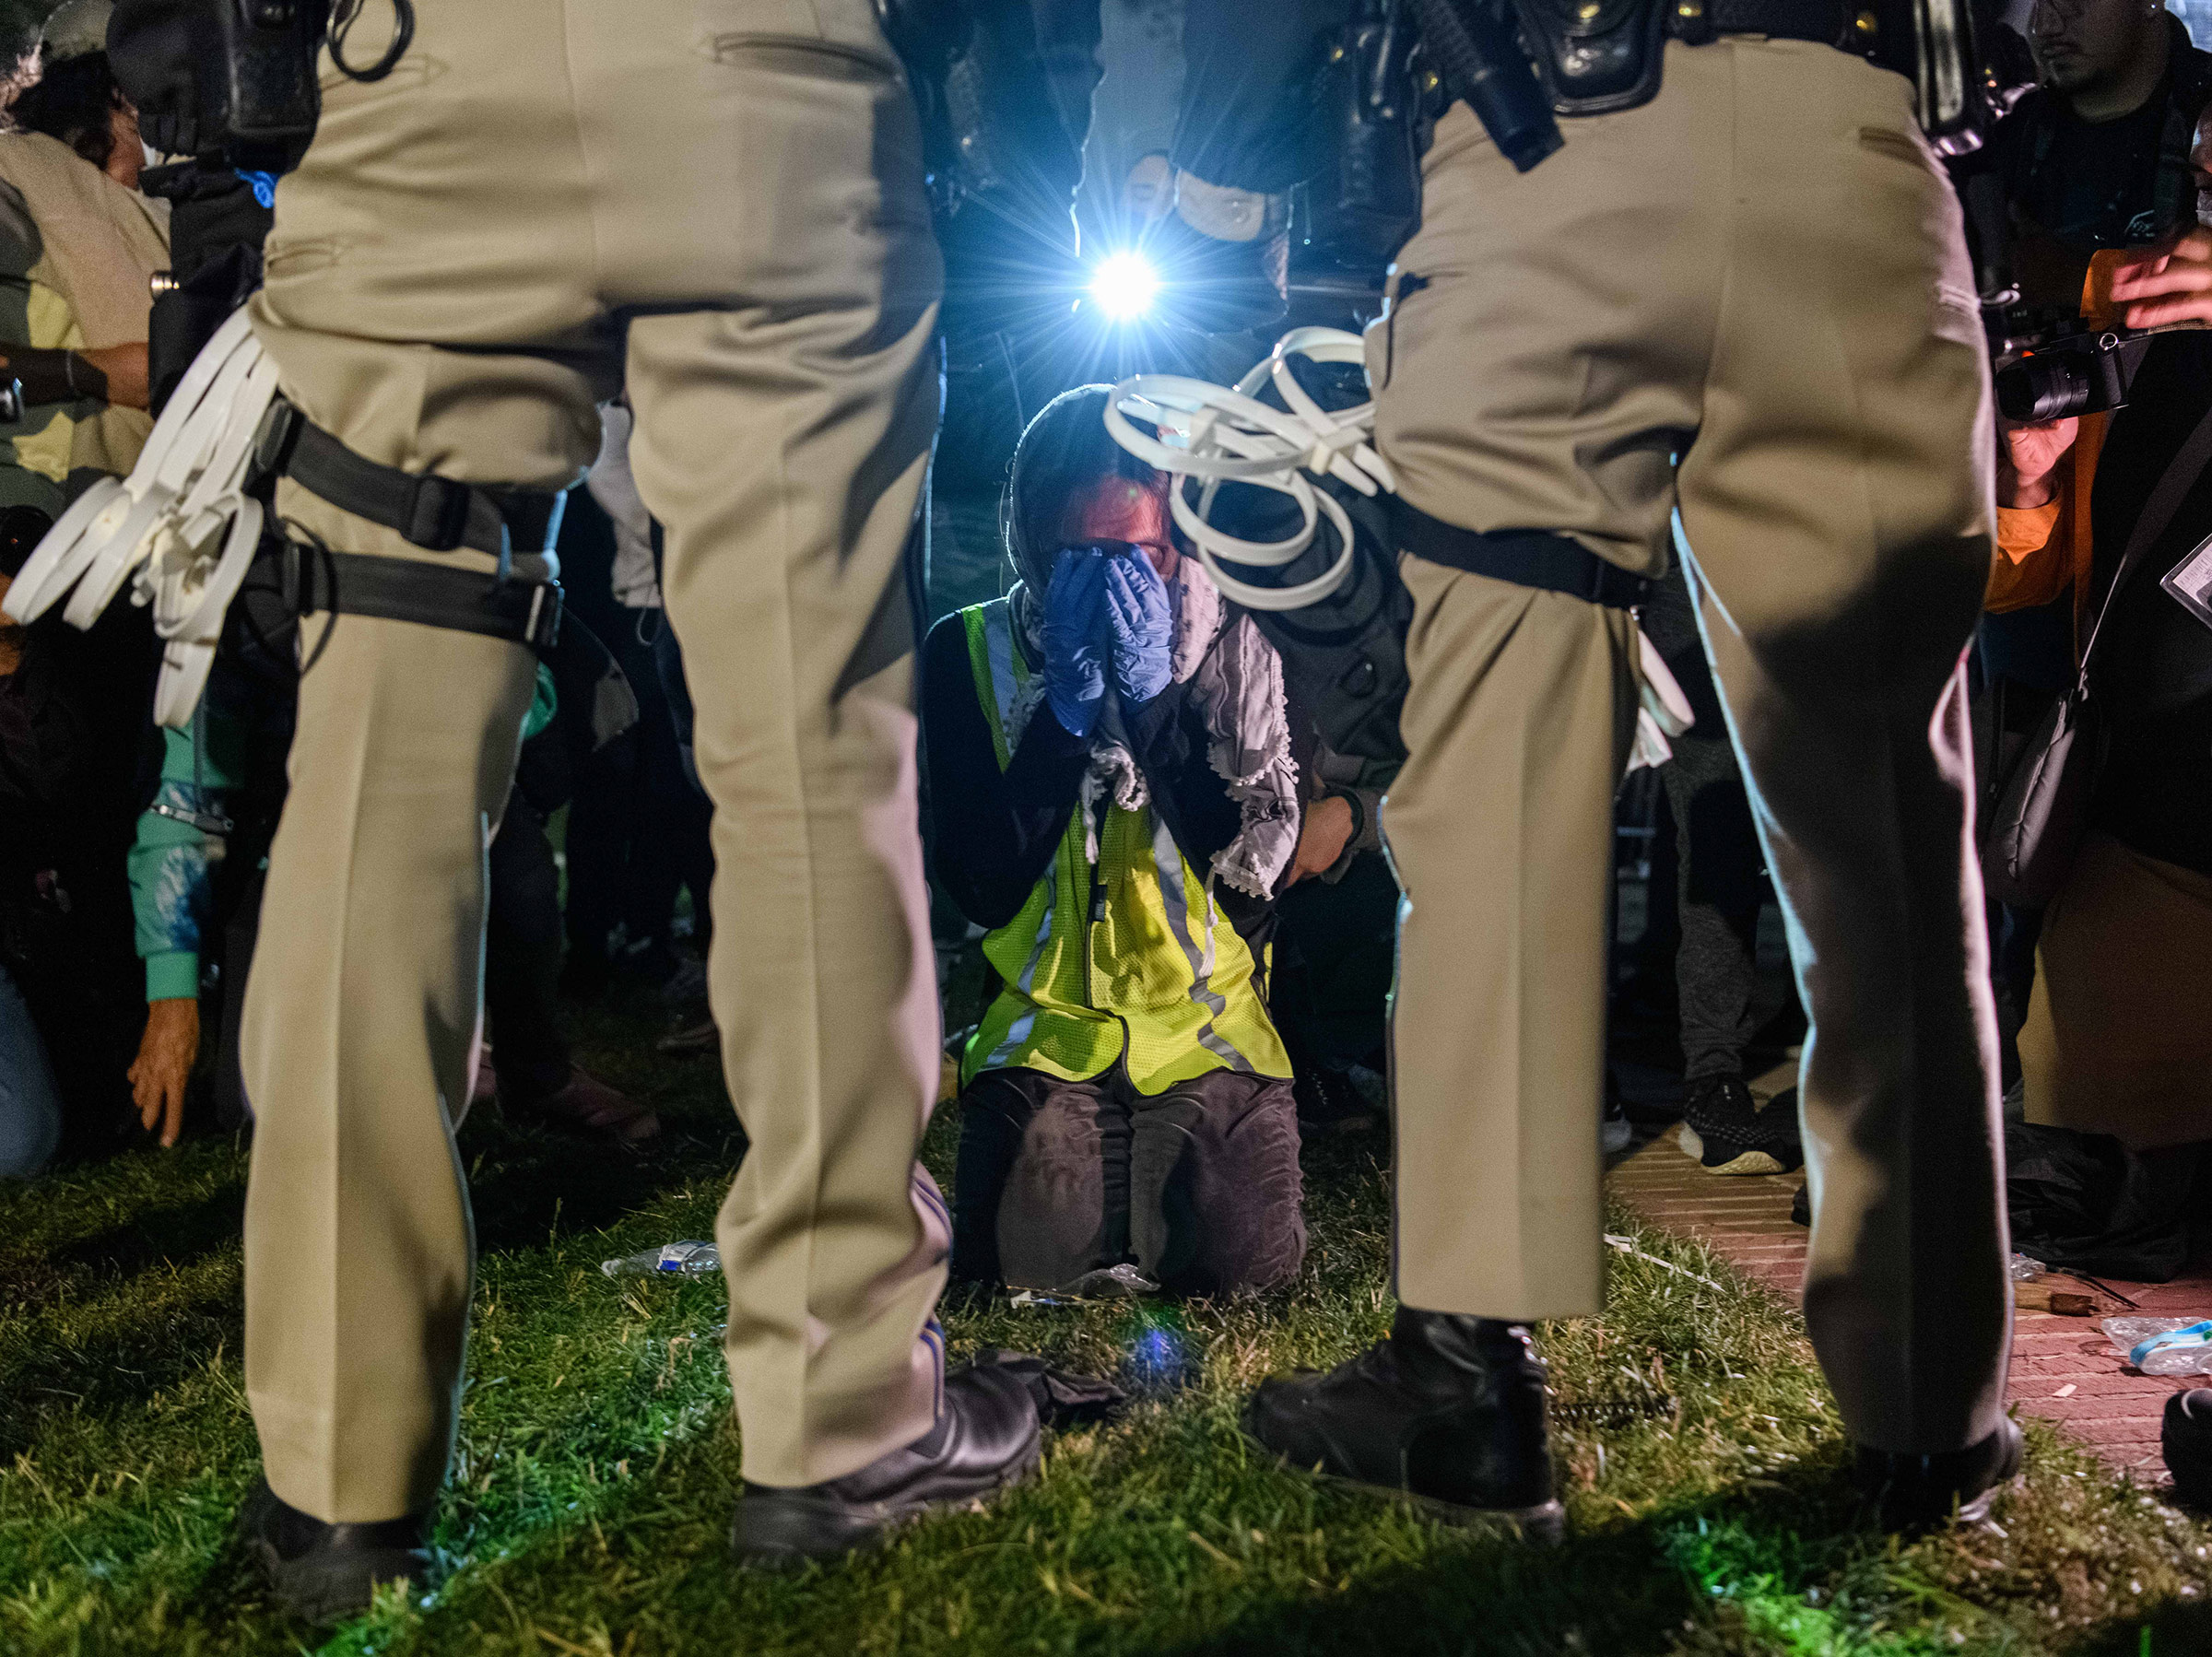 A pro-Palestinian protester kneels in front of two California Highway Patrol officers in Los Angeles on May 1.